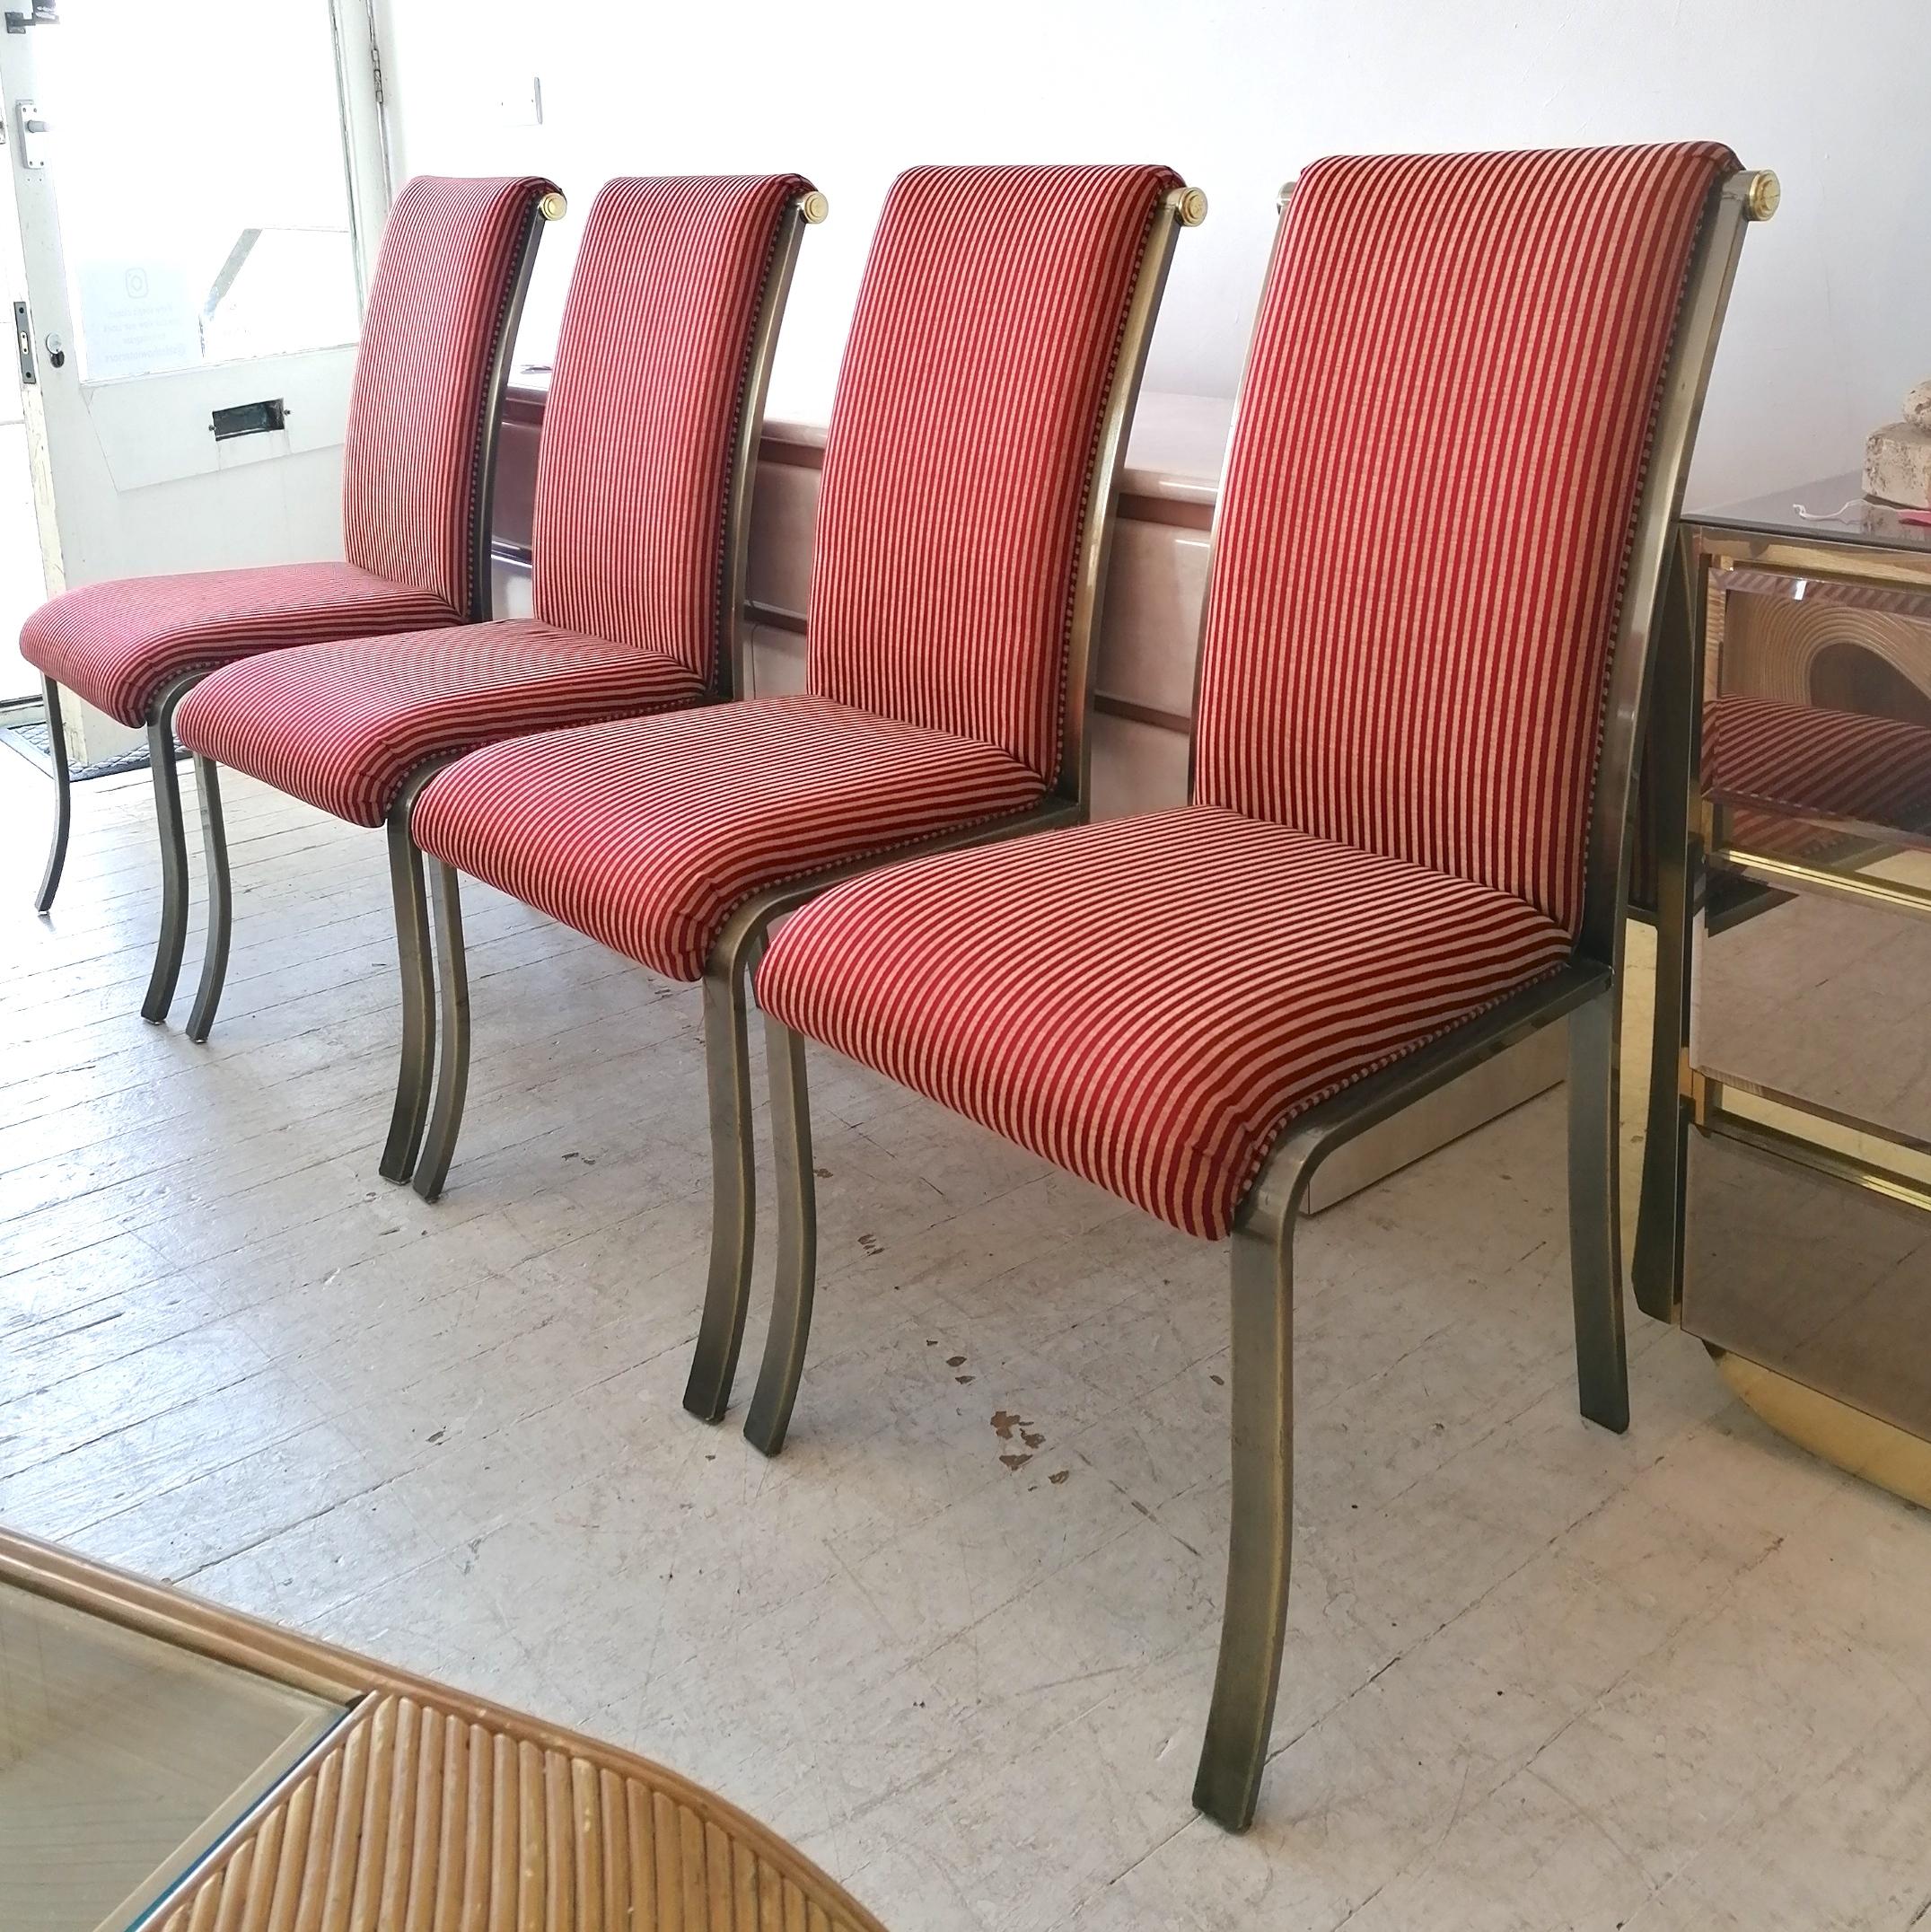 Regency Set of 6 Dining Chairs by Design Institute of America, 1980s, Attr Milo Baughman For Sale